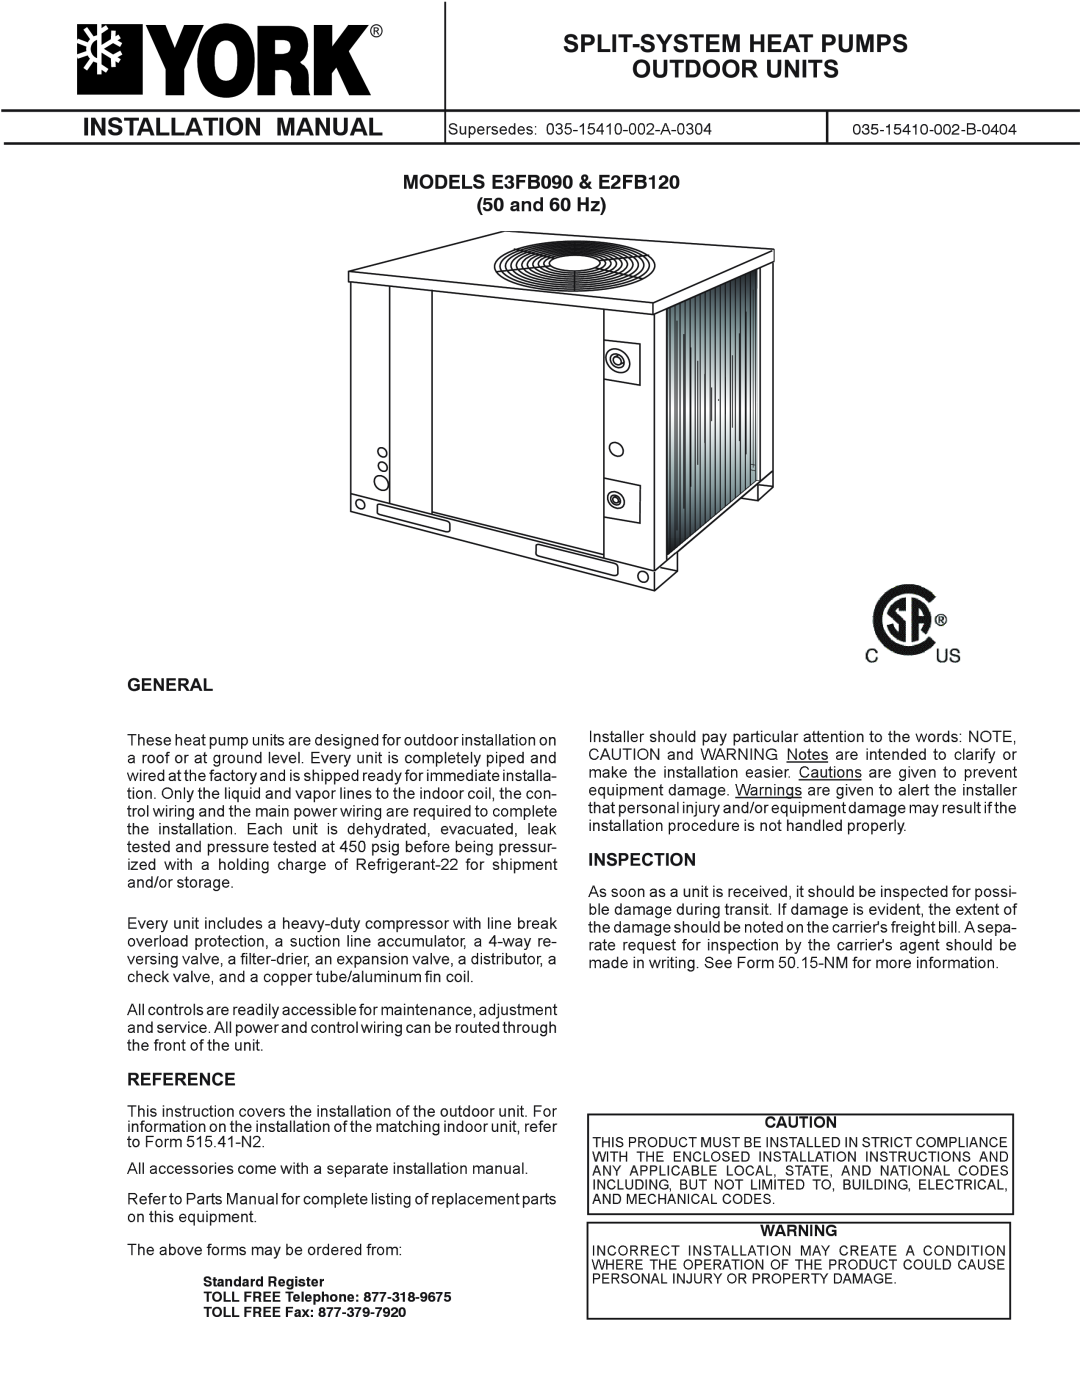 York E3FB090 installation manual Split-Systemheat Pumps Outdoor Units, General Reference, Inspection, Installation Manual 